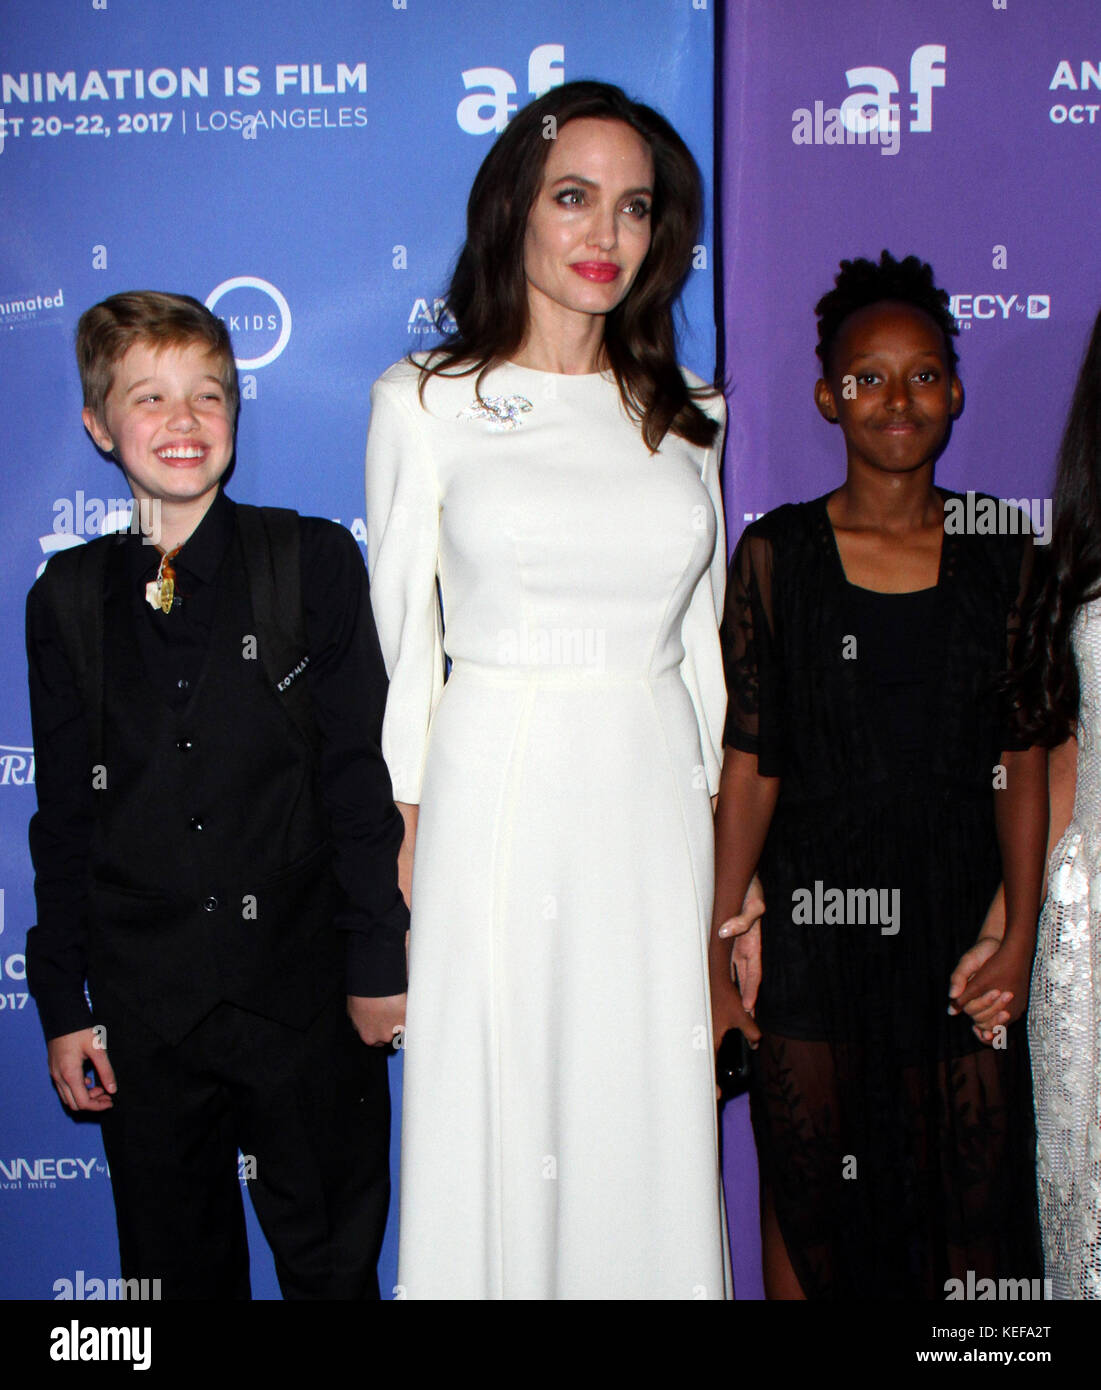 Hollywood, CA, USA. 20th Oct, 2017. Shiloh Jolie-Pitt, Angelina Jolie and Zahara Jolie-Pitt. 'The Breadwinner'' U.S. Premiere held at the TCL Chinese 6 Theatre in Hollywood. Photo Credit: AdMedia Credit: AdMedia/ZUMA Wire/Alamy Live News Stock Photo